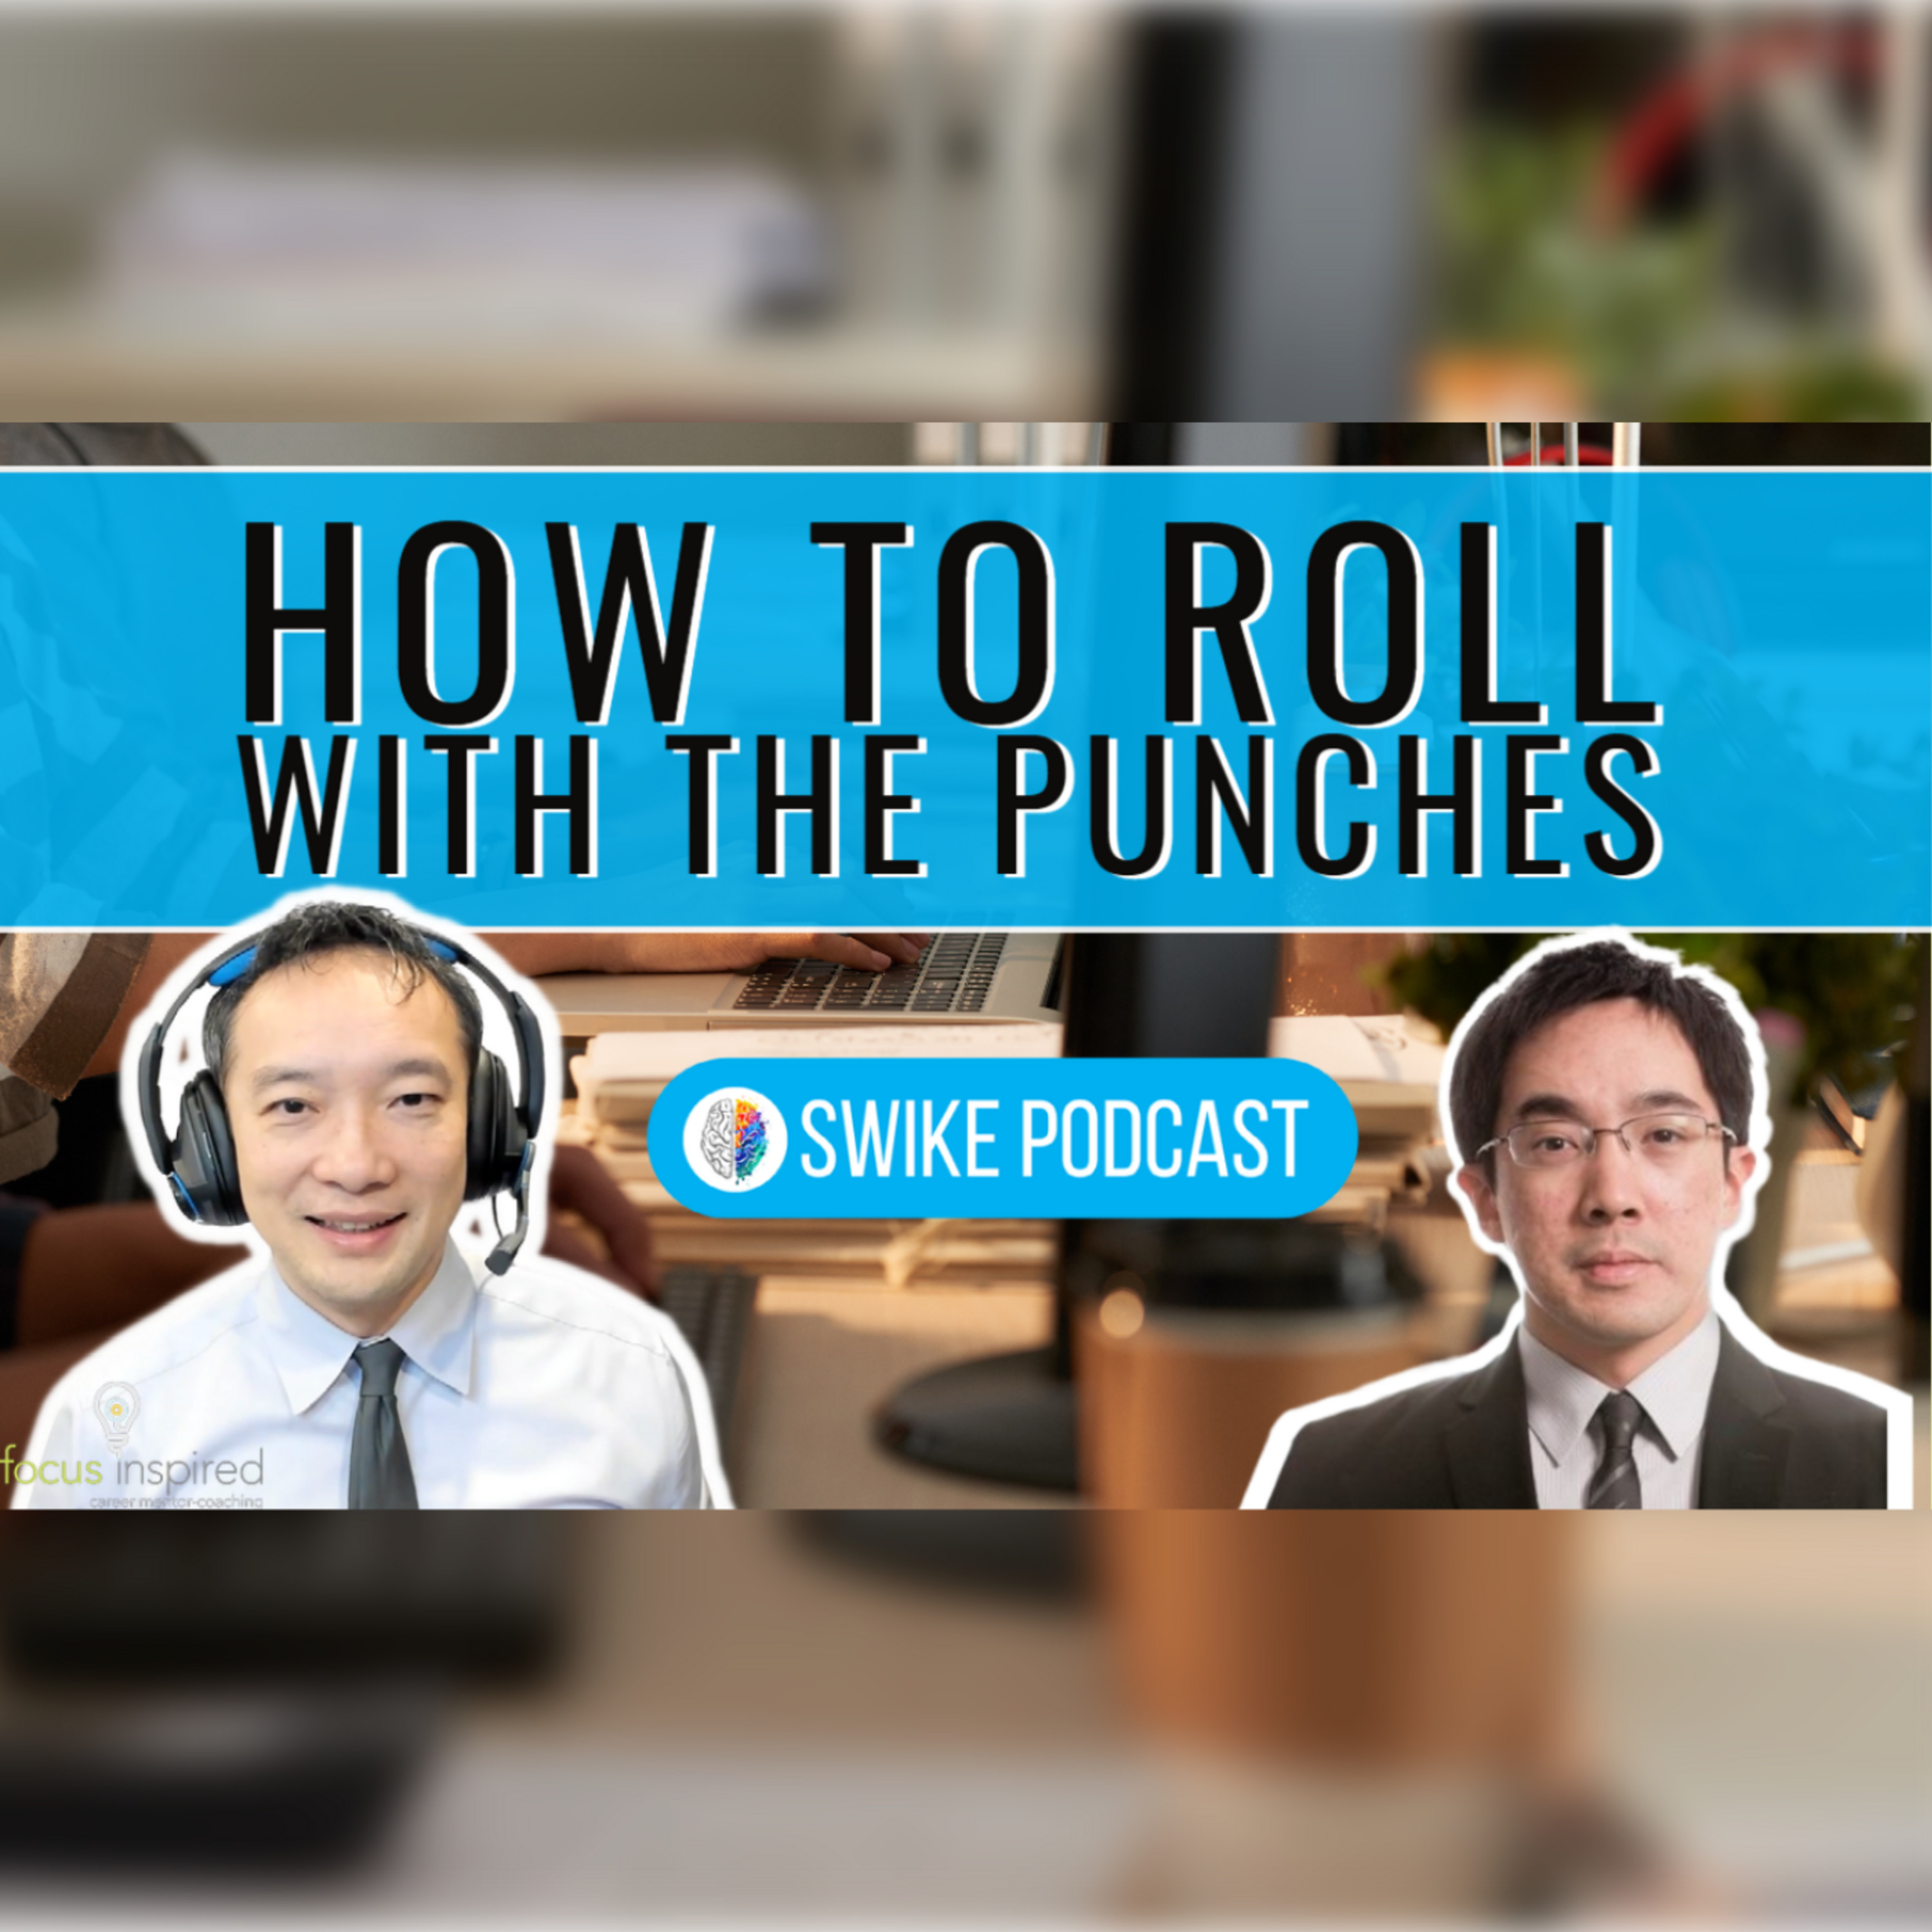 How to roll with the punches | Patrick Wardhana SWIKE Podcast (PW-001)